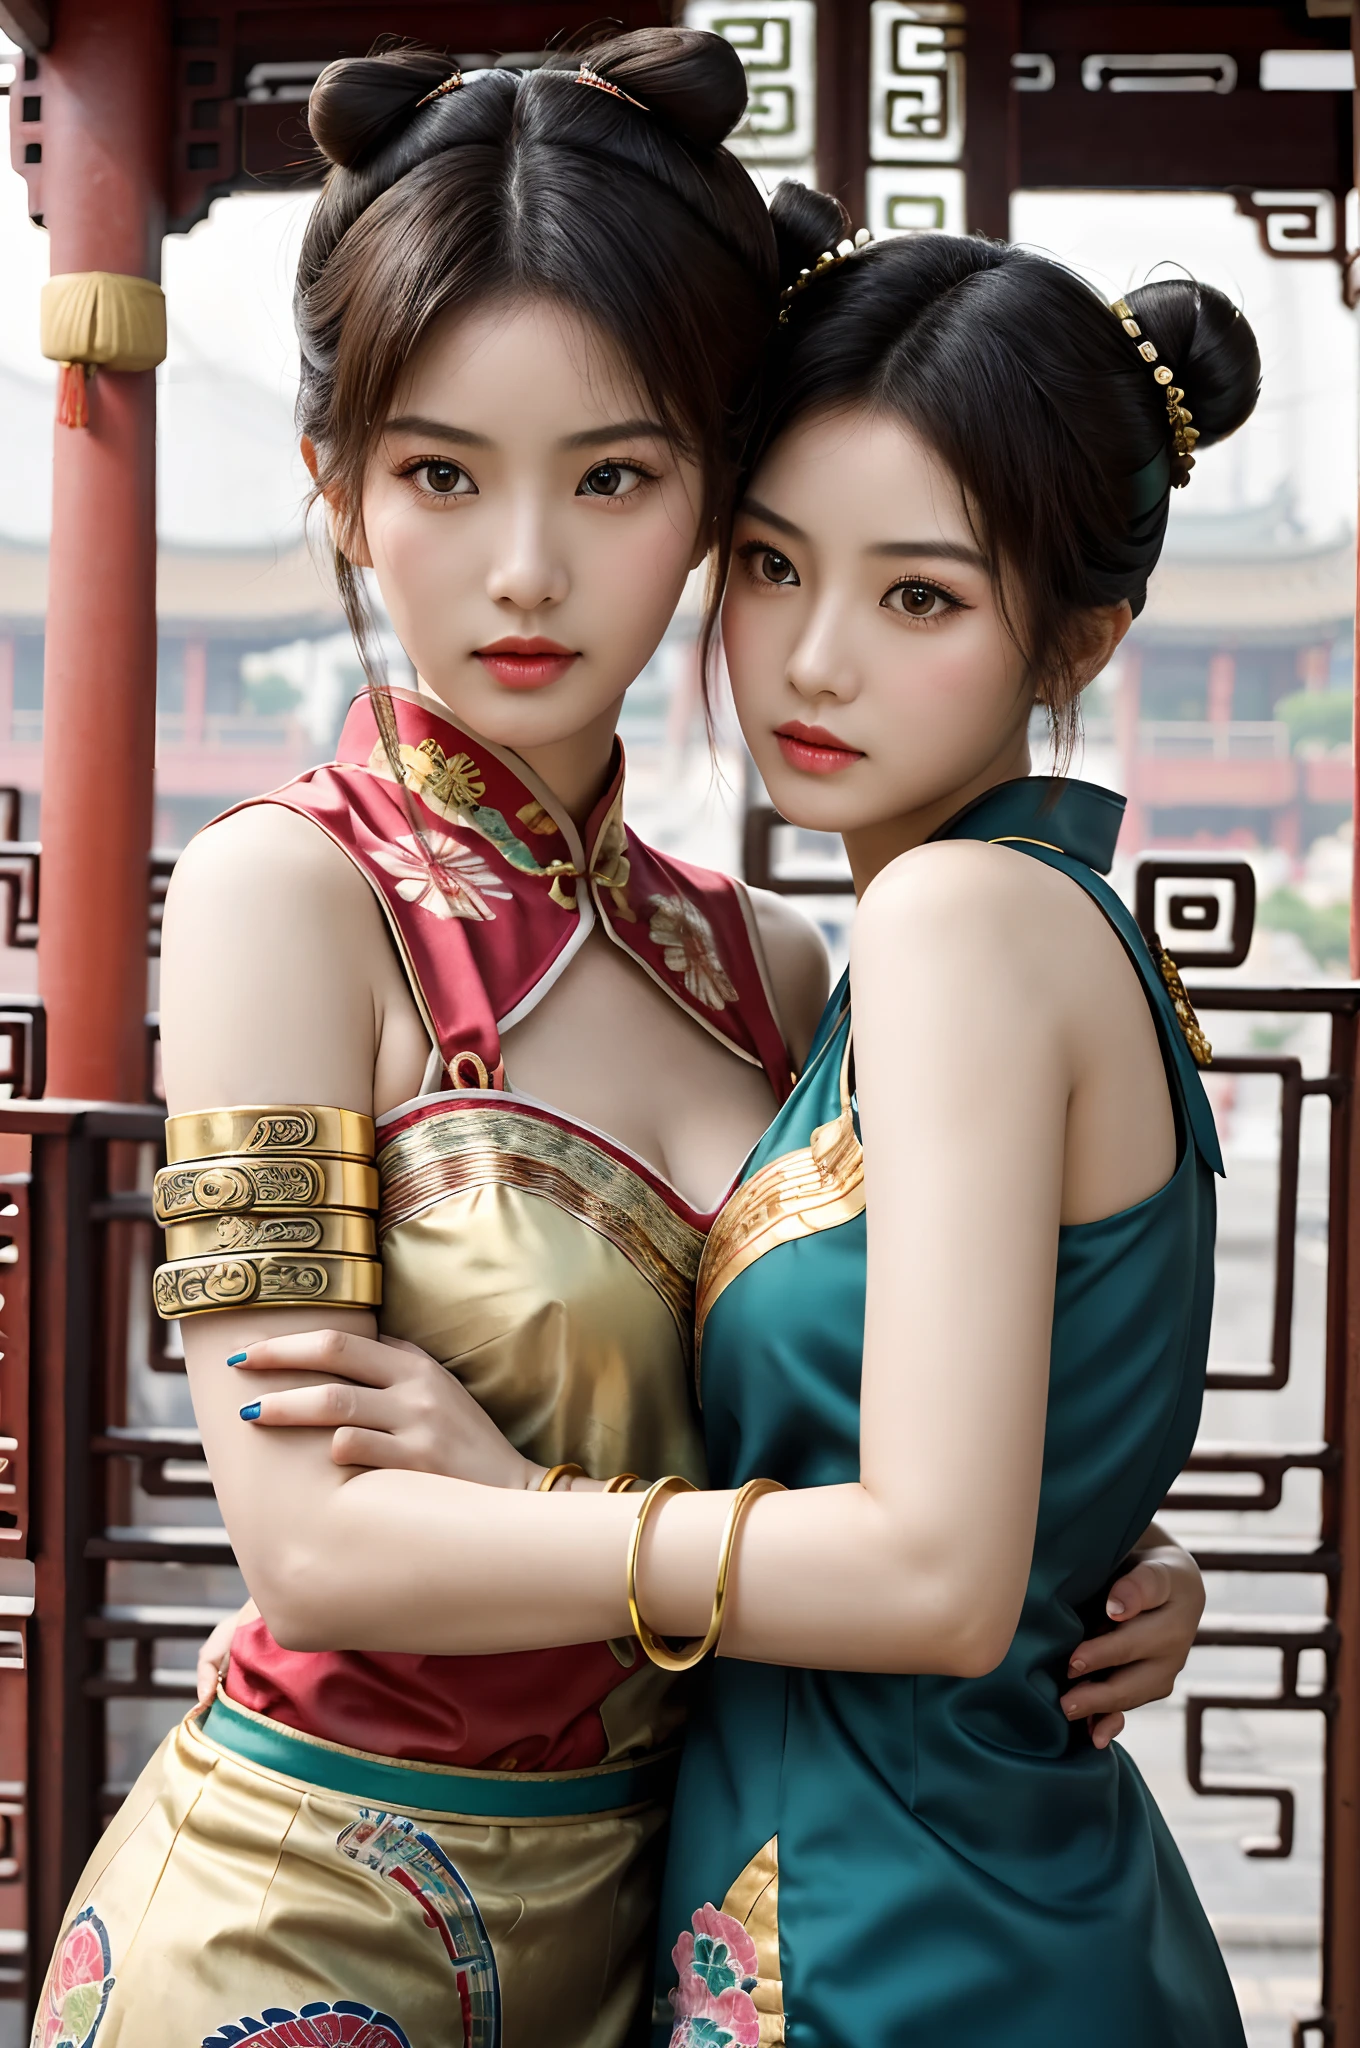 ((Realistic:1.5)),Ulzzang-6500:1.3，((Best quality)), ((Masterpiece)),((Detailed)),2girls,duo,railway station 1920's Shanghai,retro train background:1.4,{2 beautiful women}, (Upper body:1.3),(hair buns,ancient Chinese retro hairpins:1.4),Hug and touch each other, Tease your friend's waist, Breathless friends, Biting a friend's earlobe, crouched,super wide shot,Face focus, Long legs,Curvy, Barefoot,Wide hips, Thin legs, Oversized eyes,Long eyelashes, (Detailed face,beautidful eyes, detailed pupils,detailed clothes features), (armlets, bangle:1.3),(Alebriès Art Style),Sharp,Perfect compounding, Intricate, Sharp focus, Dramatic,